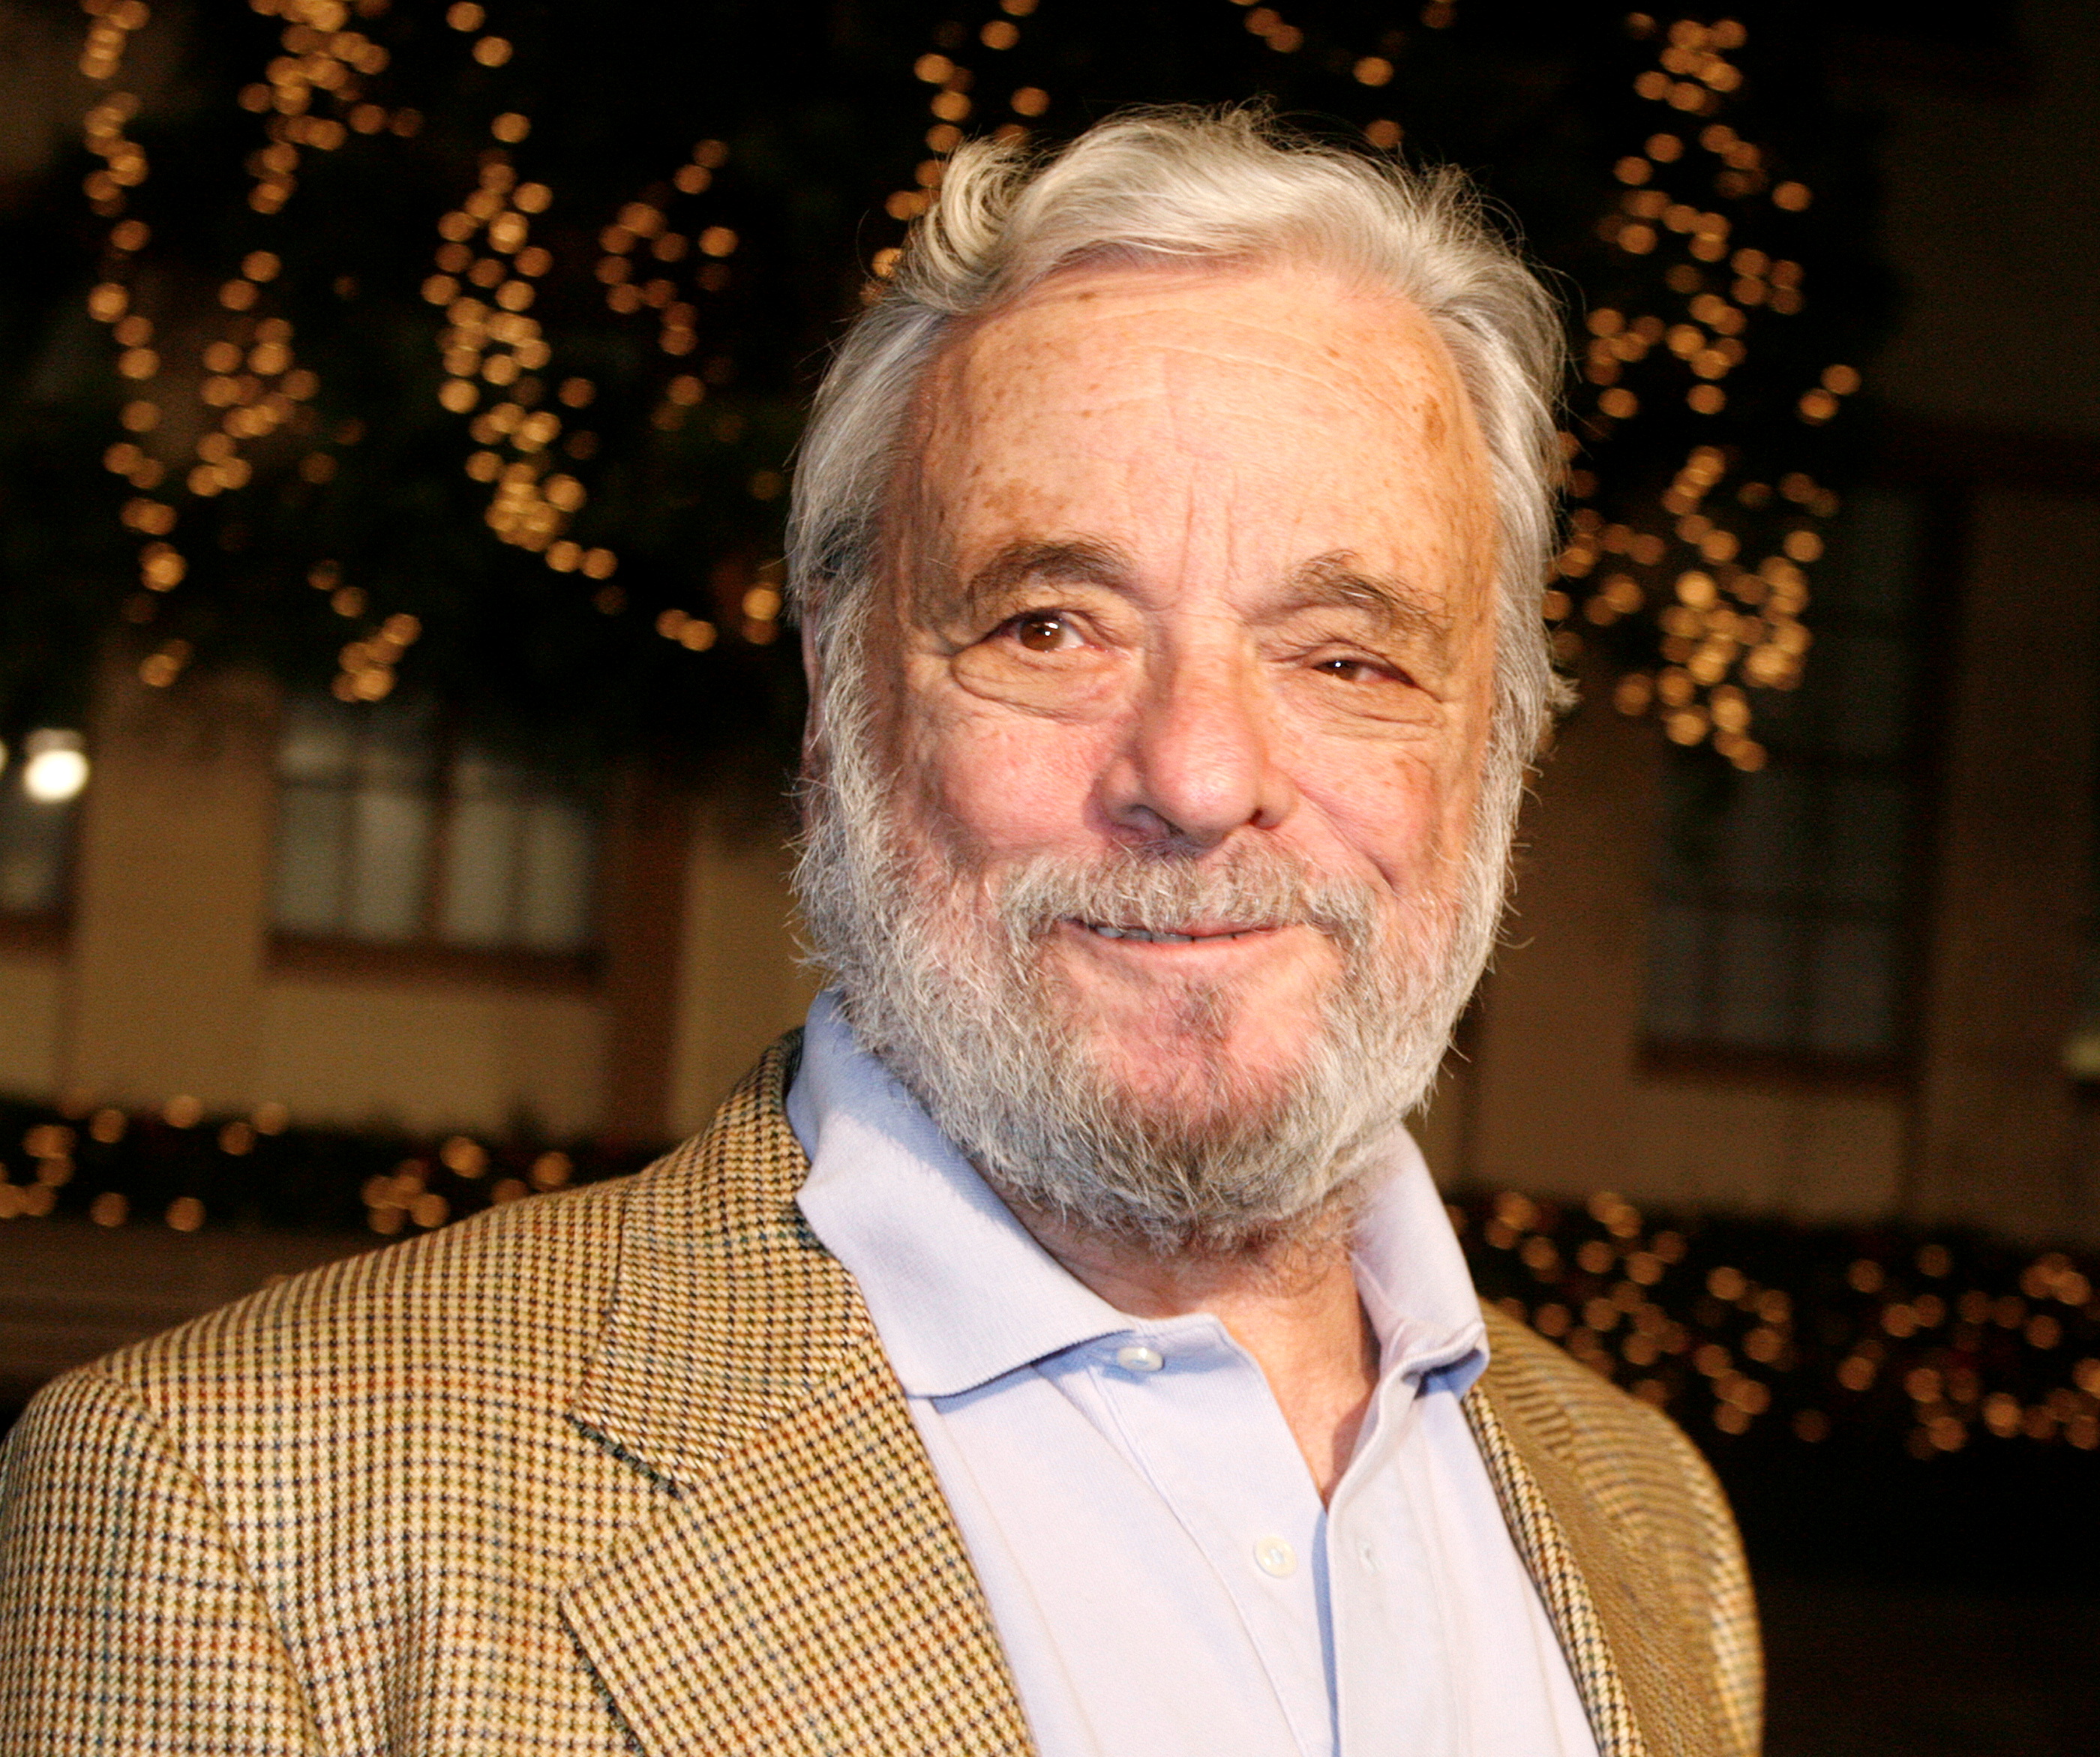 Stephen Sondheim poses as he arrives at a special screening at Paramount Studios in Hollywood